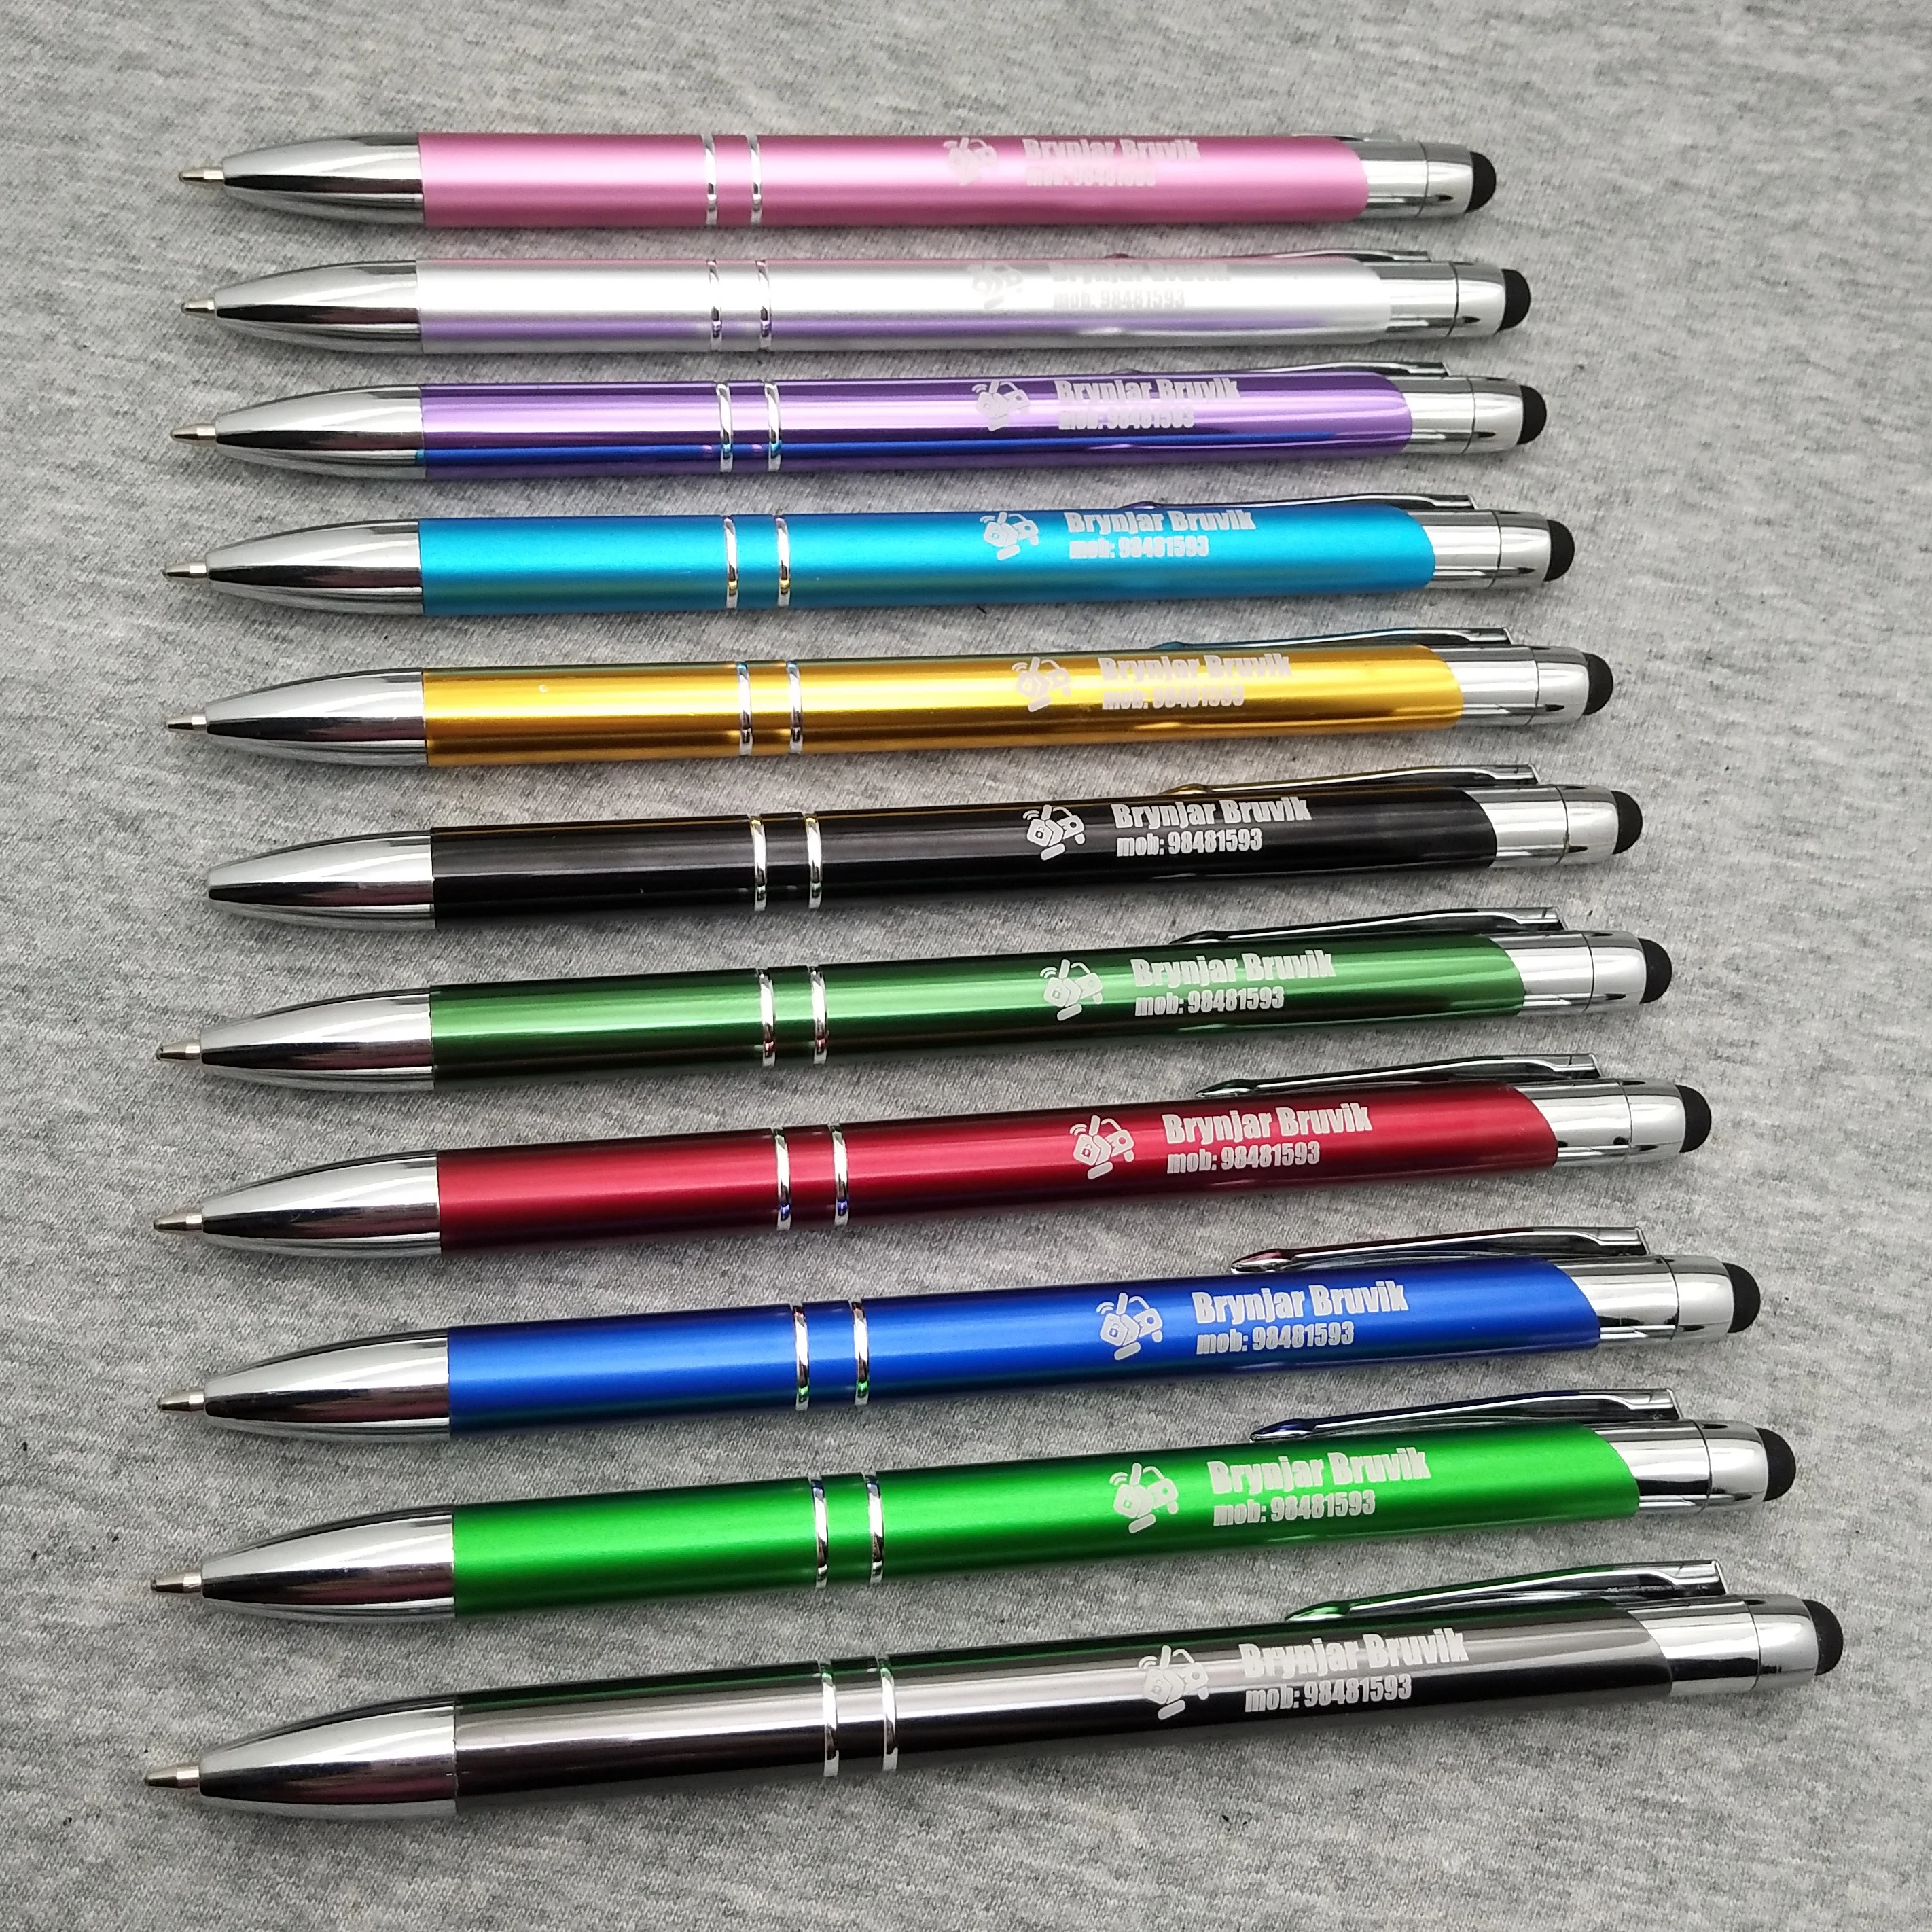 Free Shipping Personalized New design Metal ballpoint pens Touch Stylus Pen personalised with name wedding gifts for bride images - 6